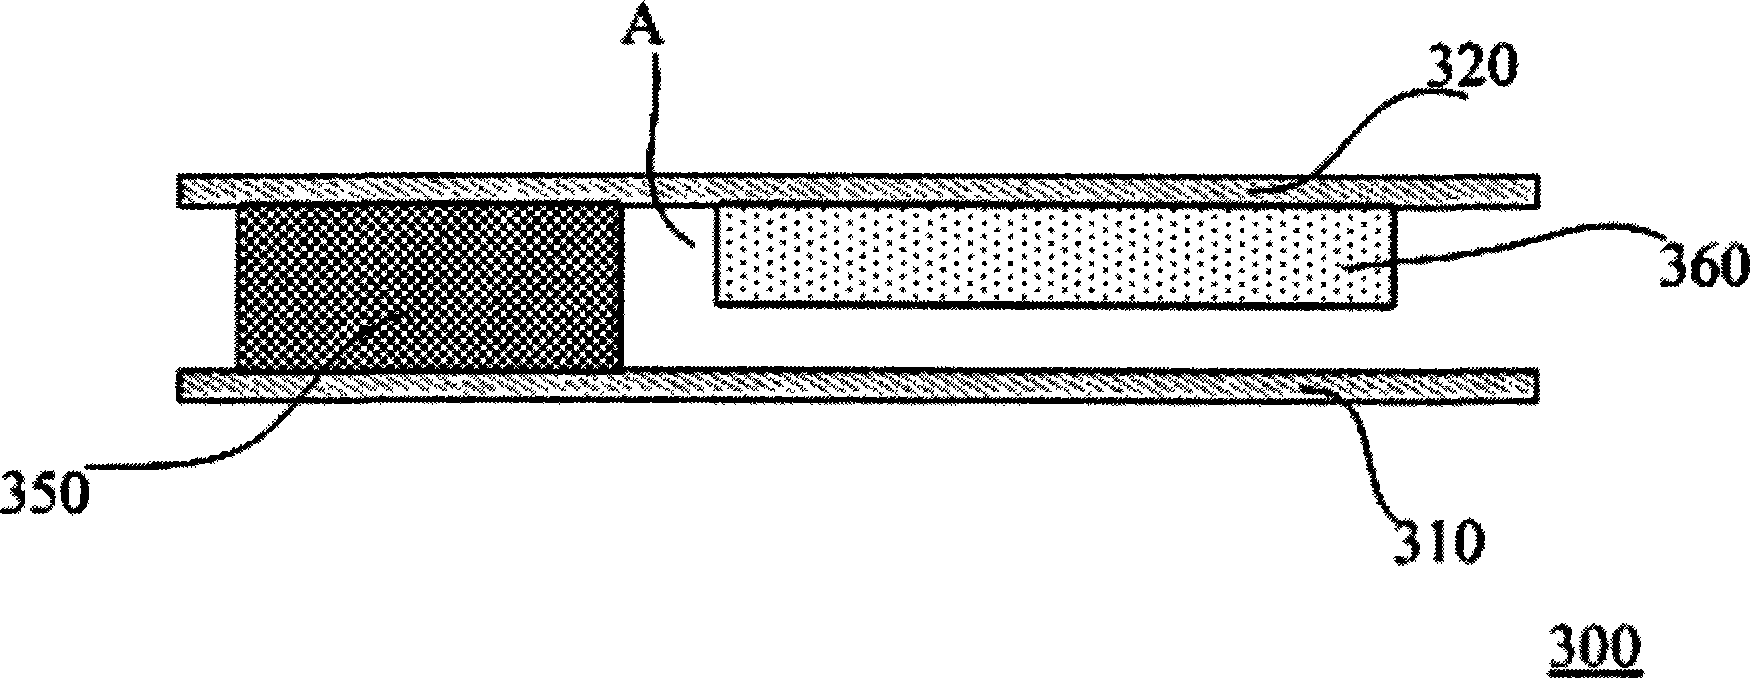 A structure of liquid crystal display panel